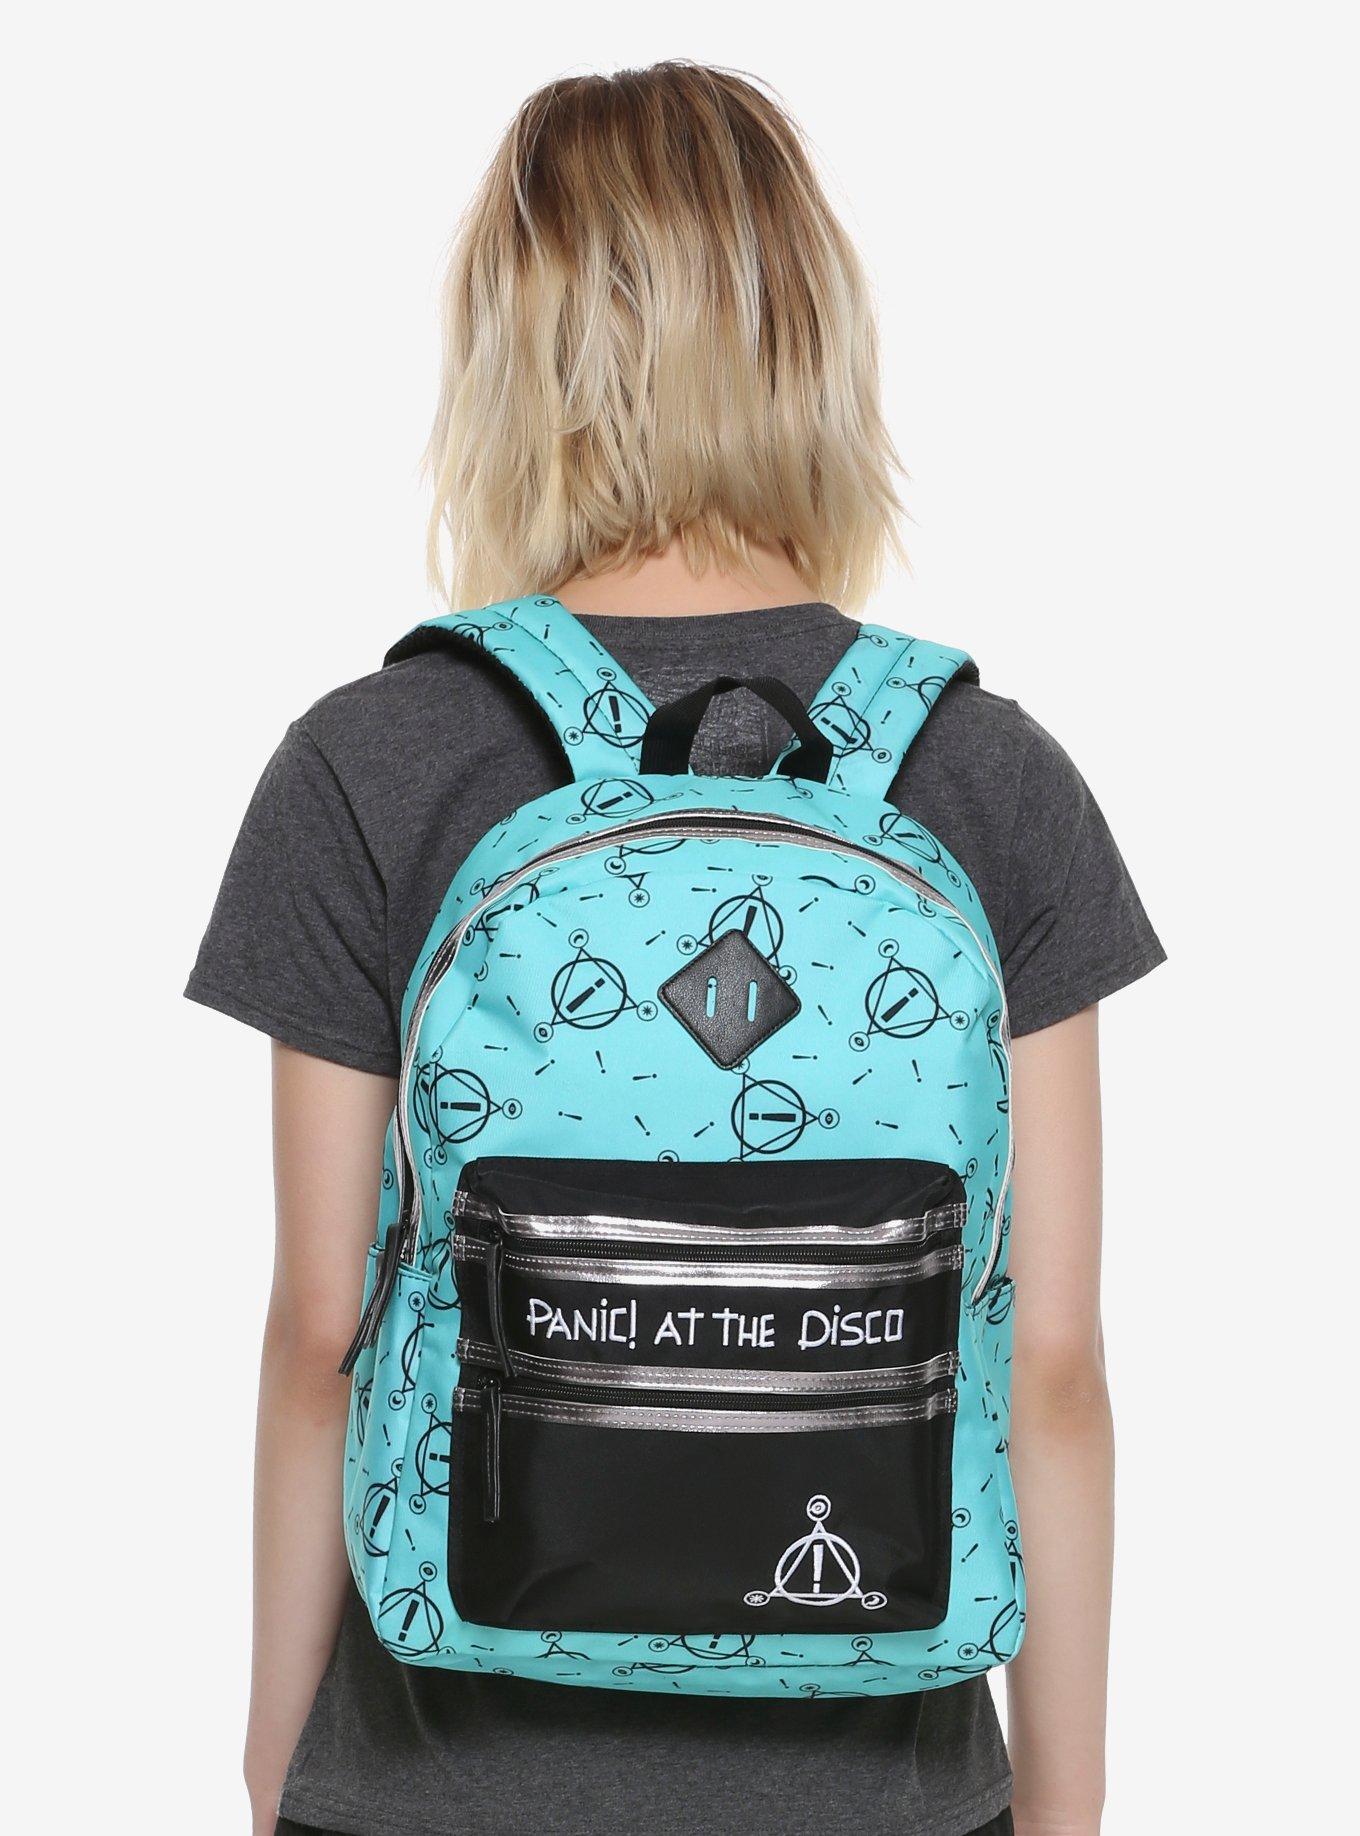 Panic! At The Disco Teal Double Zipper Backpack, , hi-res